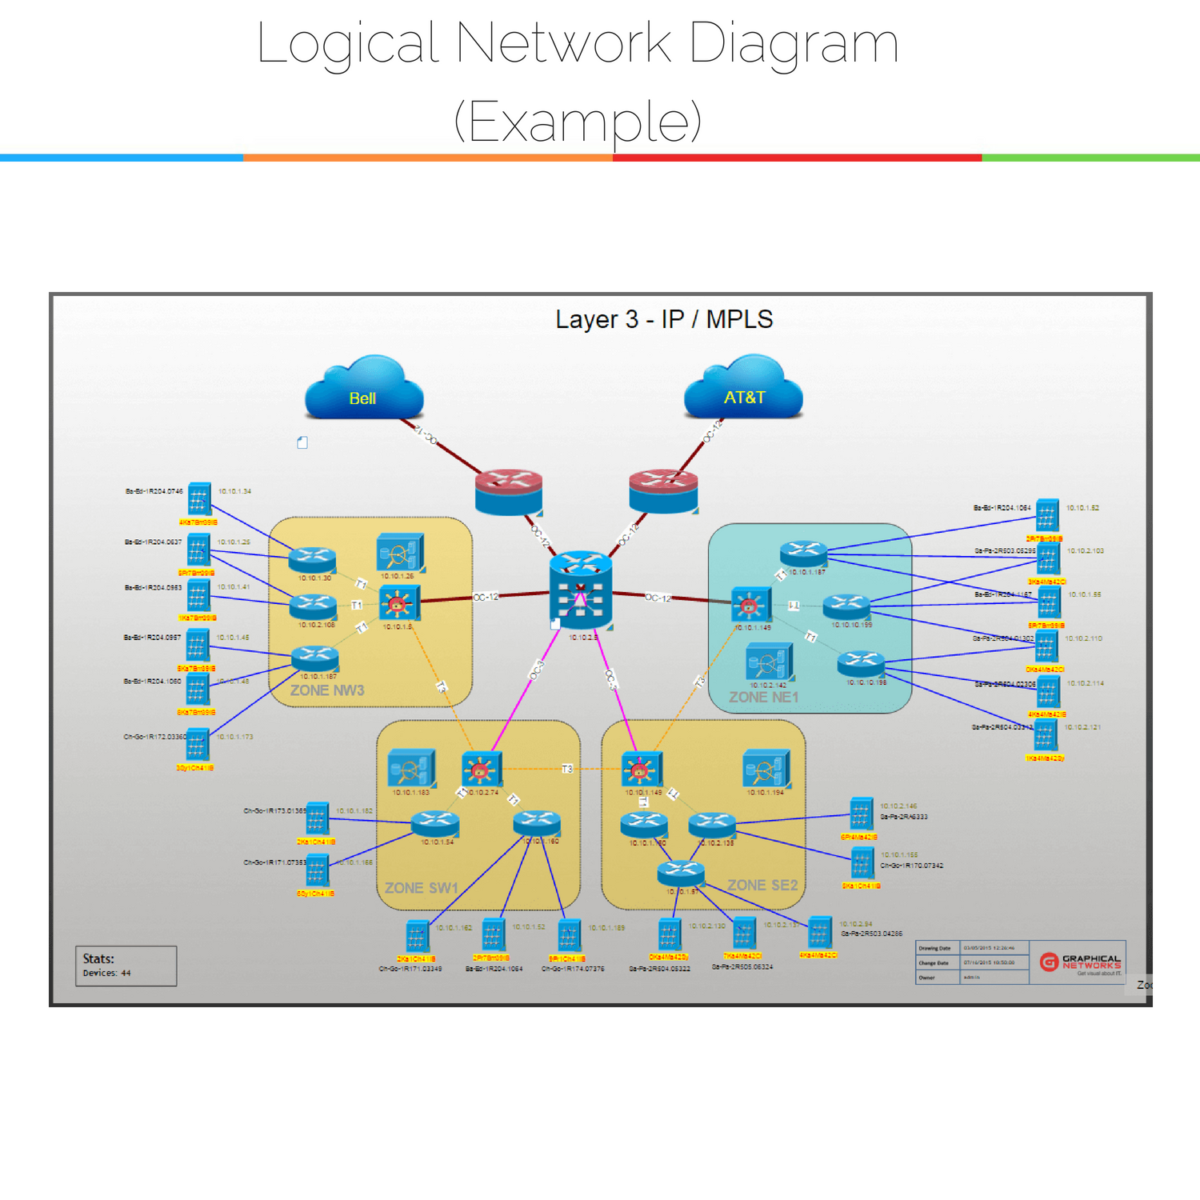 Physical Network Diagrams Explained | DCIM, Network ... network troubleshooting diagram 